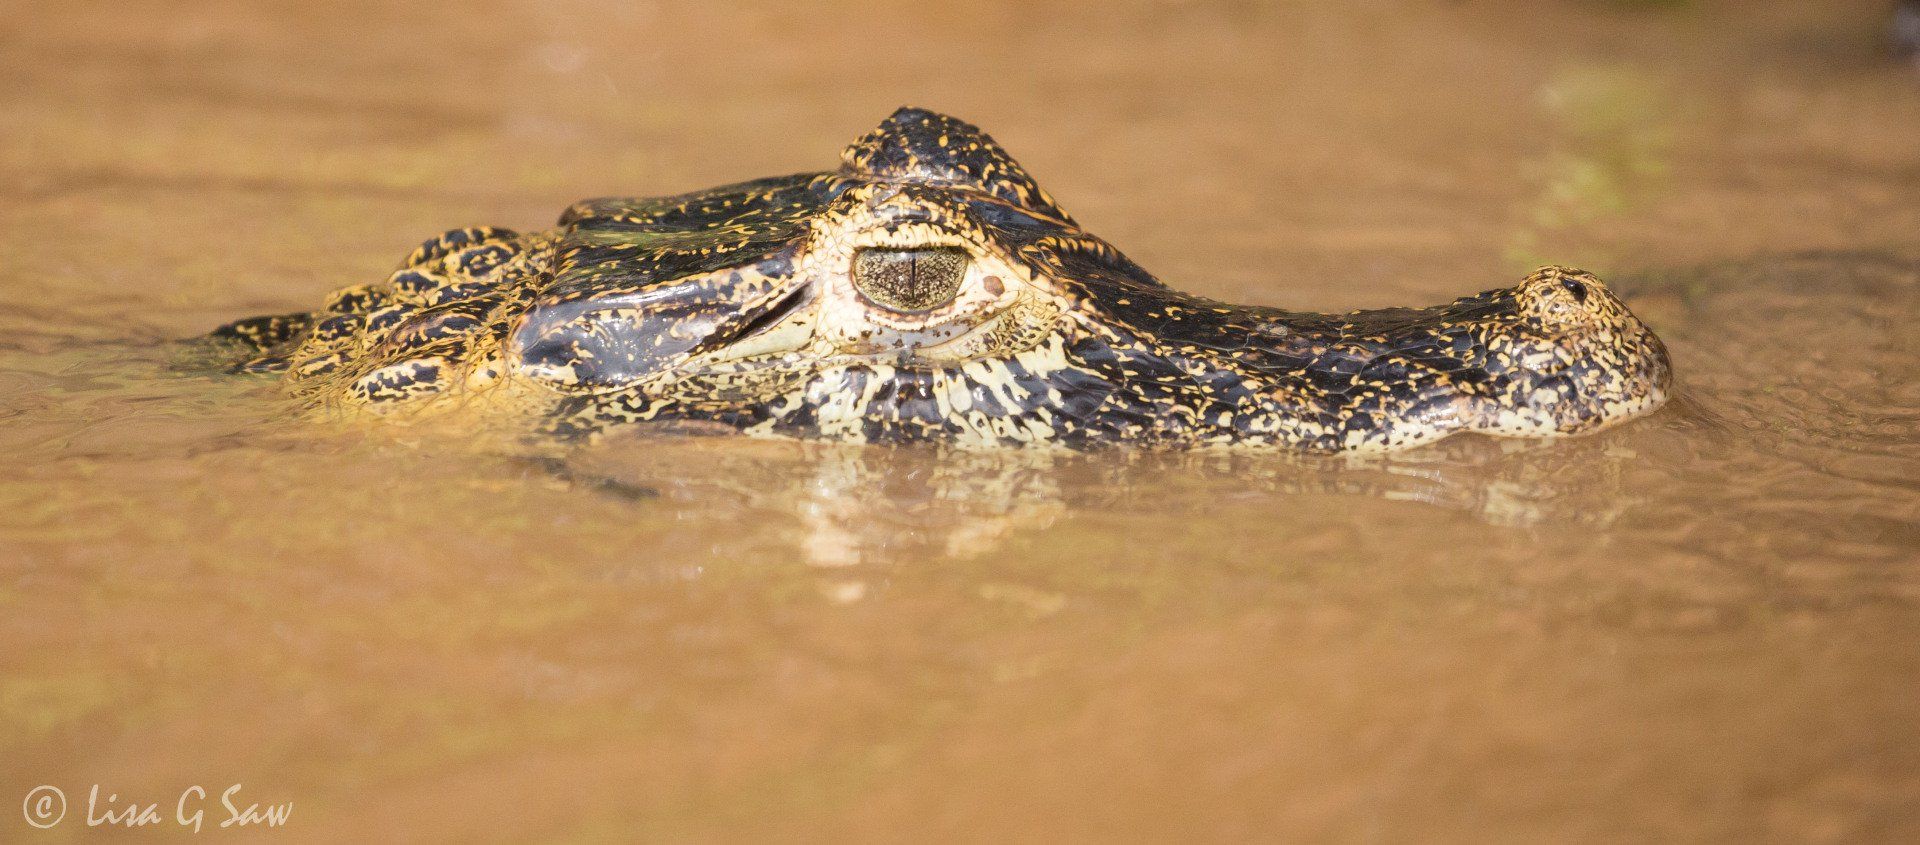 Close up of Caiman's head in water